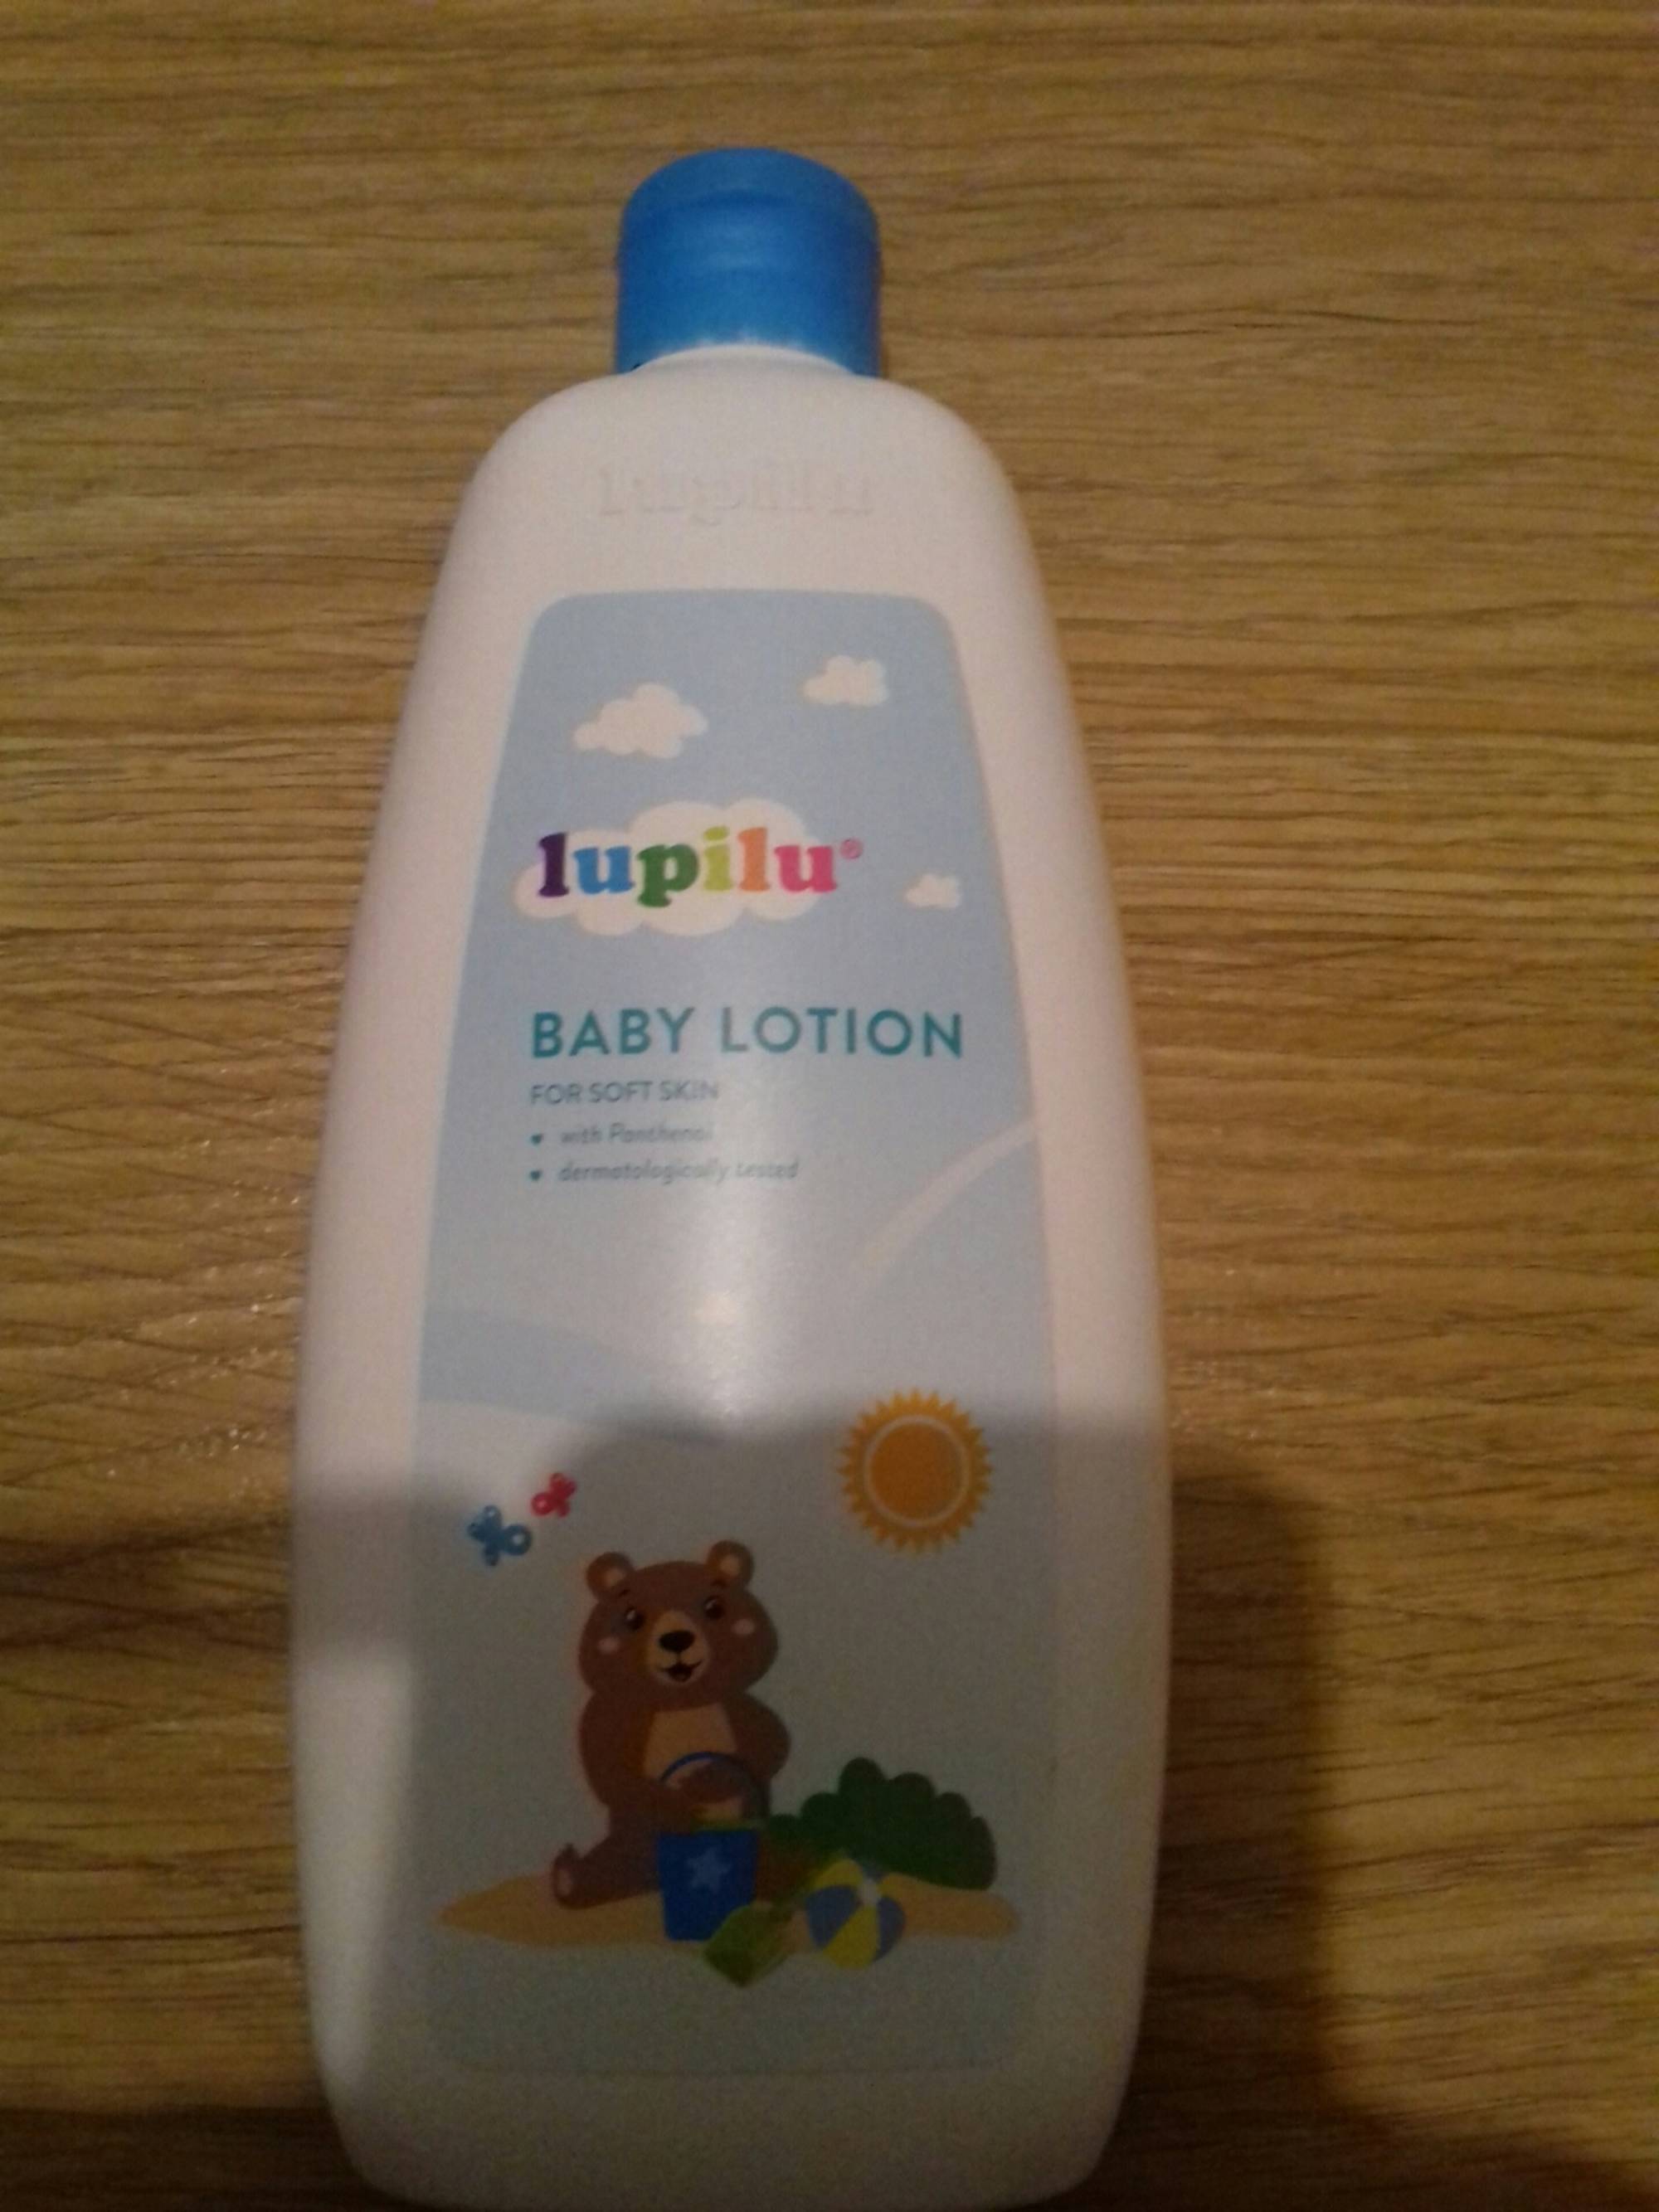 LUPILU - Baby lotion for soft skin